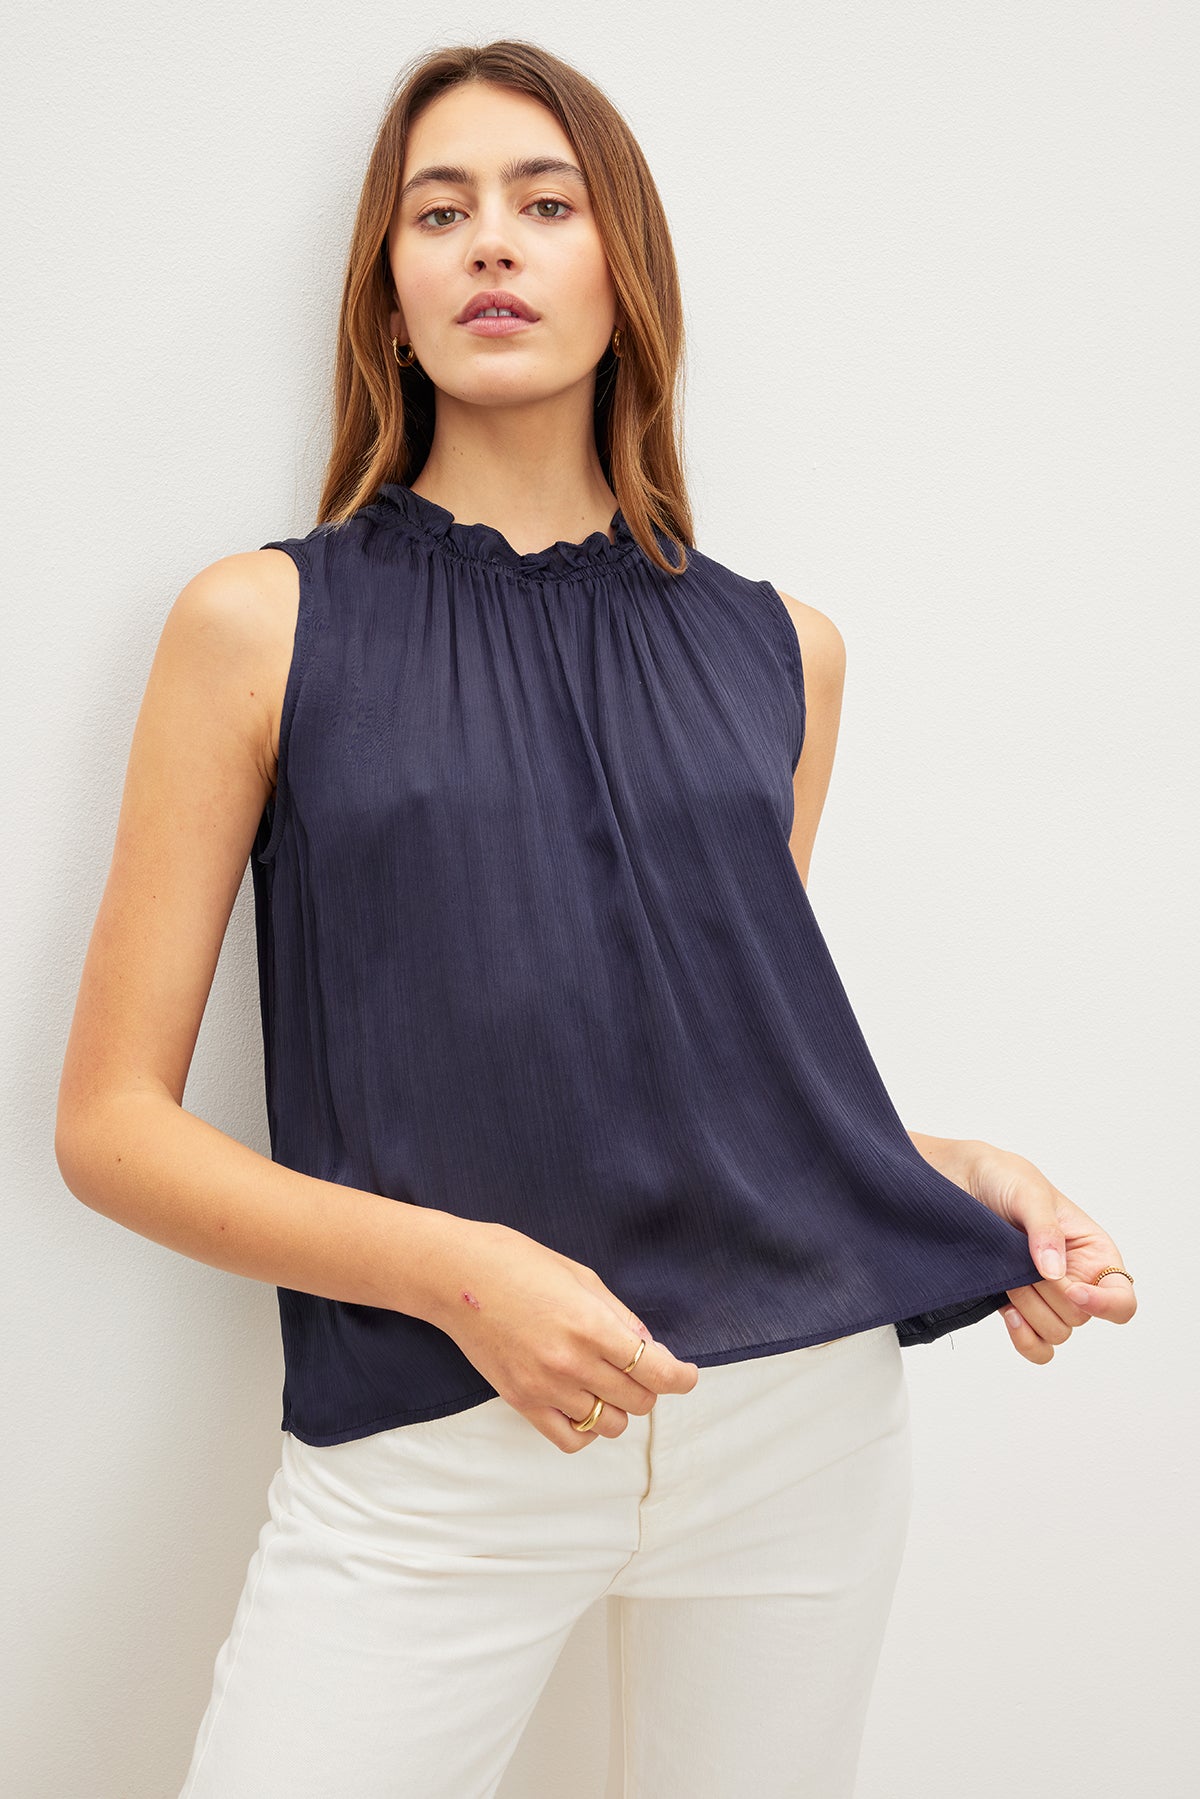   Woman in a navy blue KIANA RUFFLE NECK TANK TOP by Velvet by Graham & Spencer and white pants posing against a light background. 